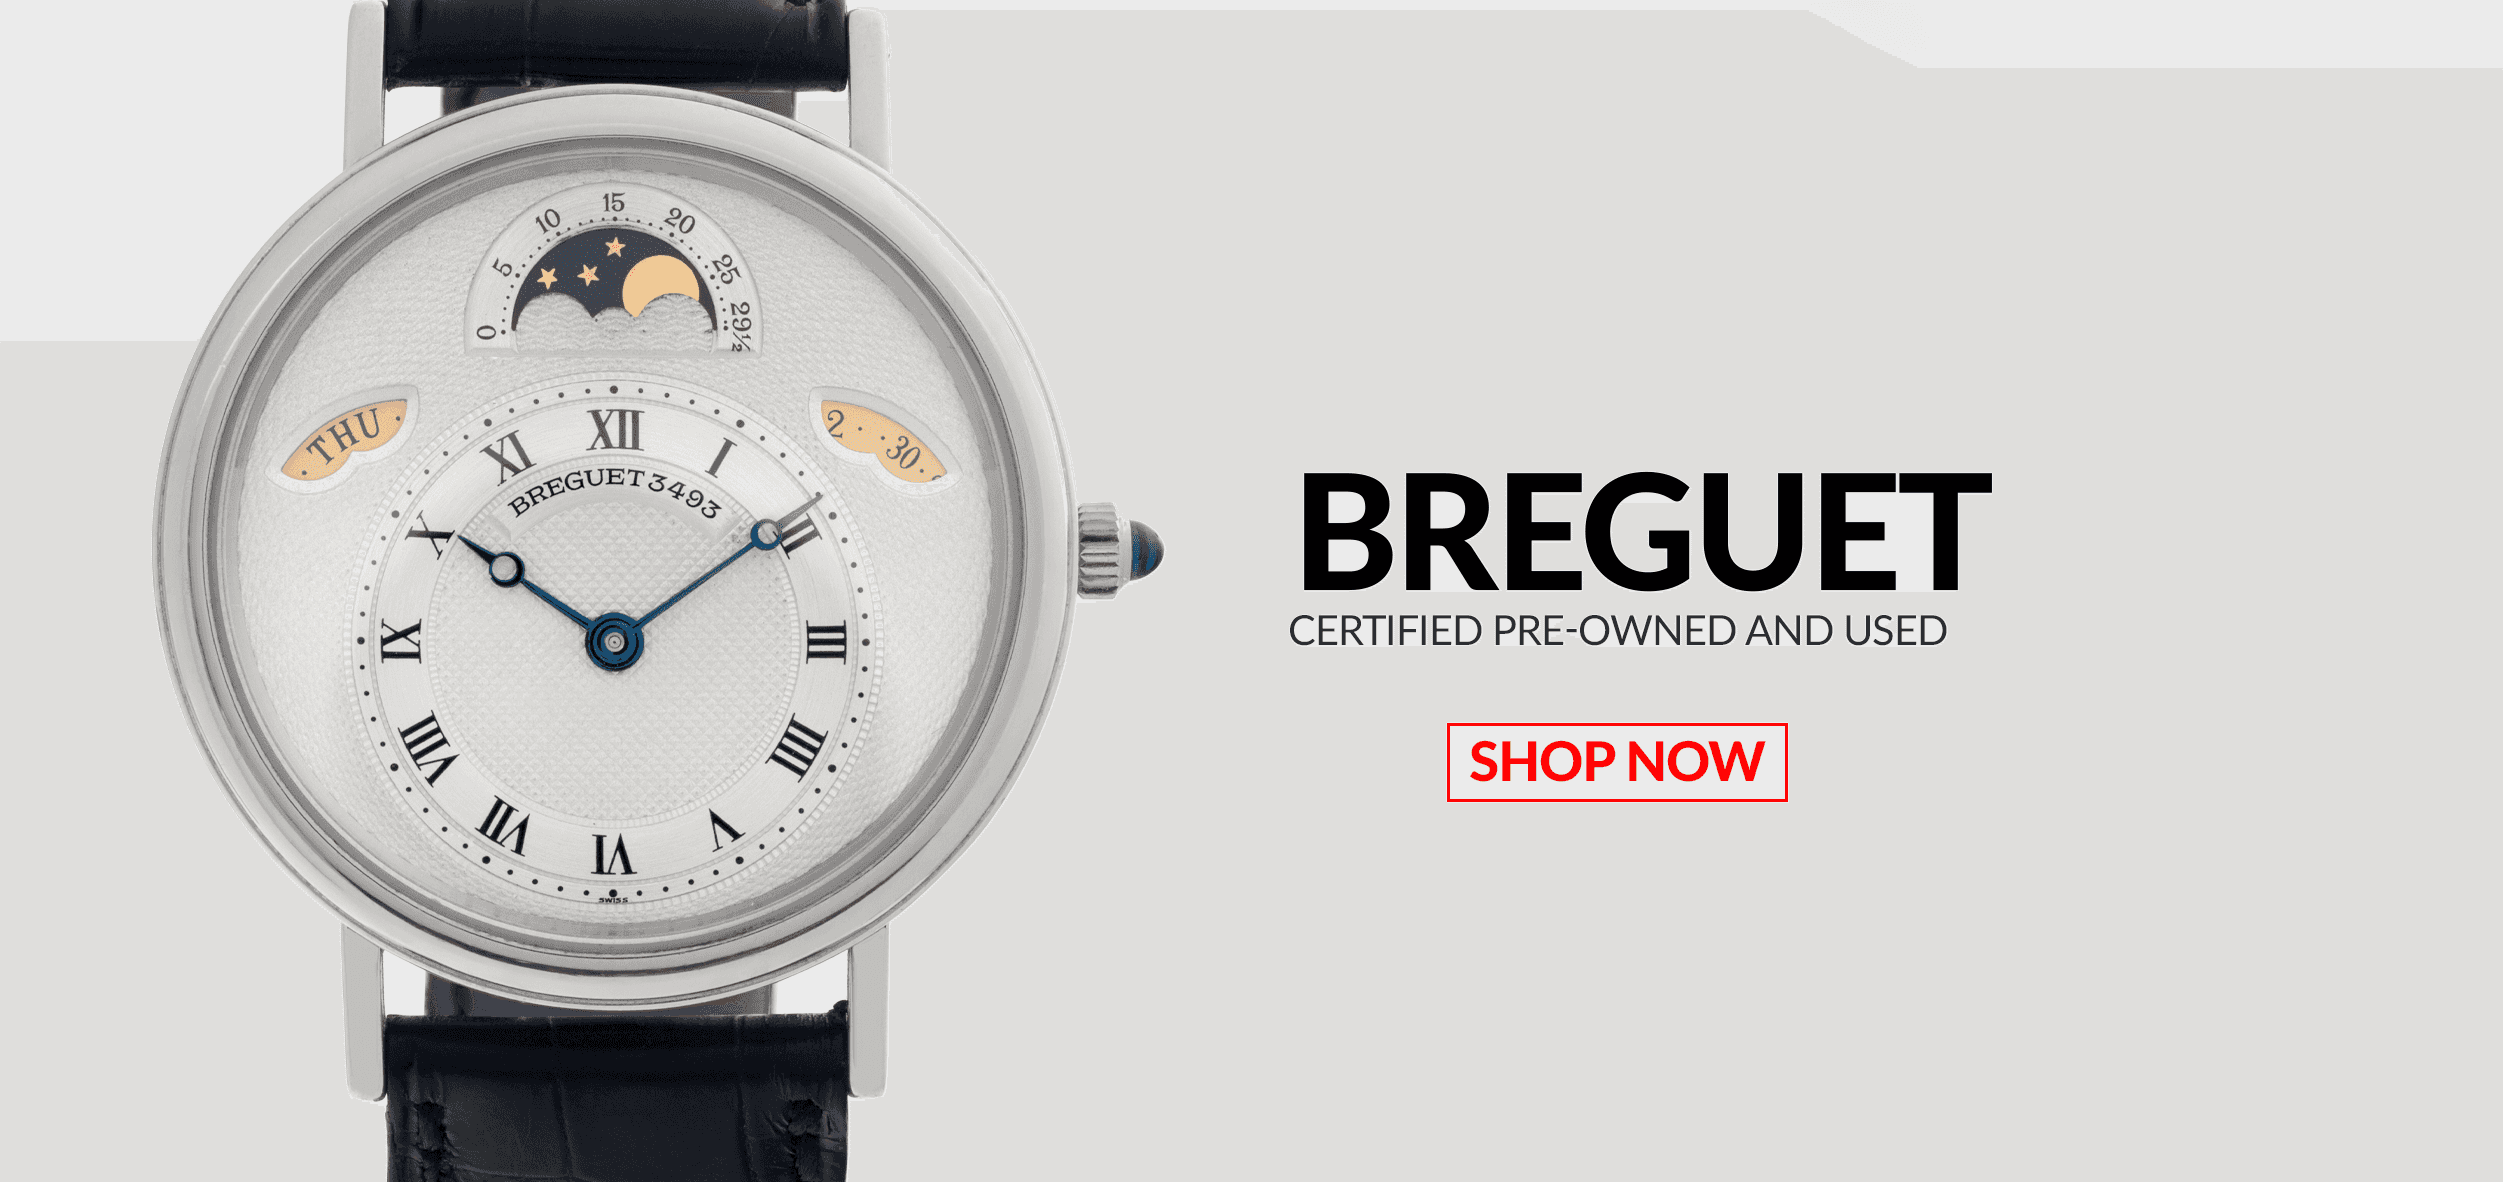 Pre-Owned Certified Used Breguet Watches Header